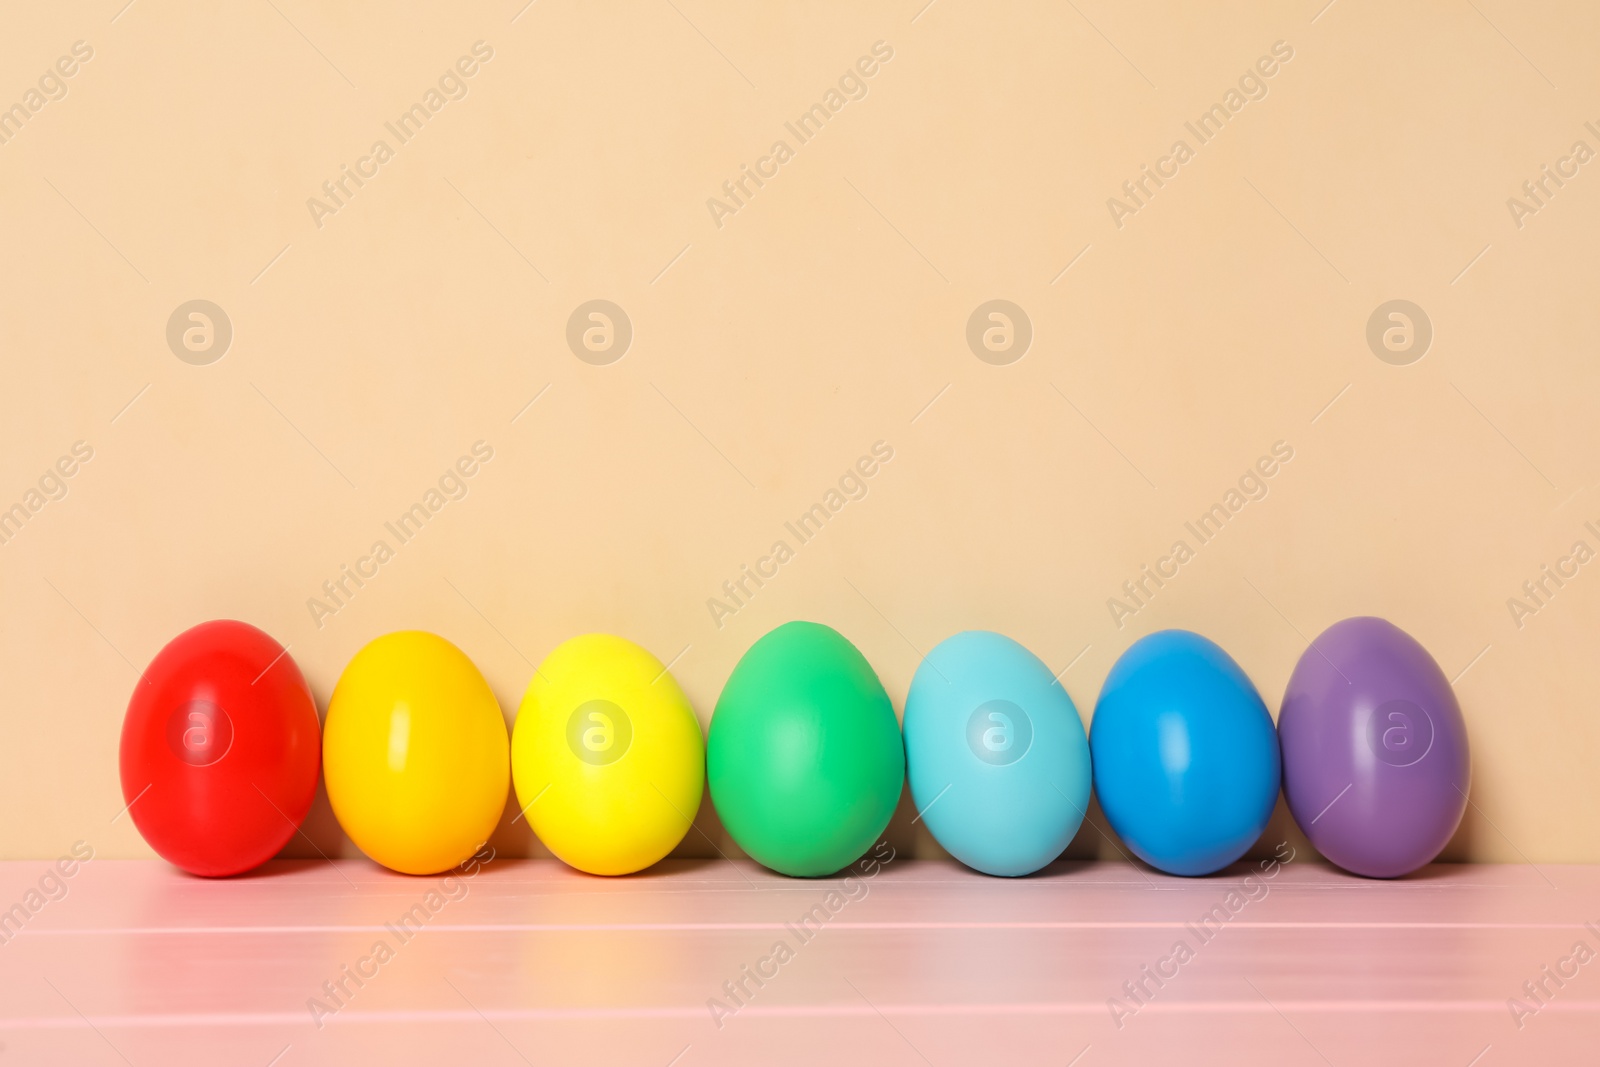 Photo of Easter eggs on pink wooden table against beige background, space for text